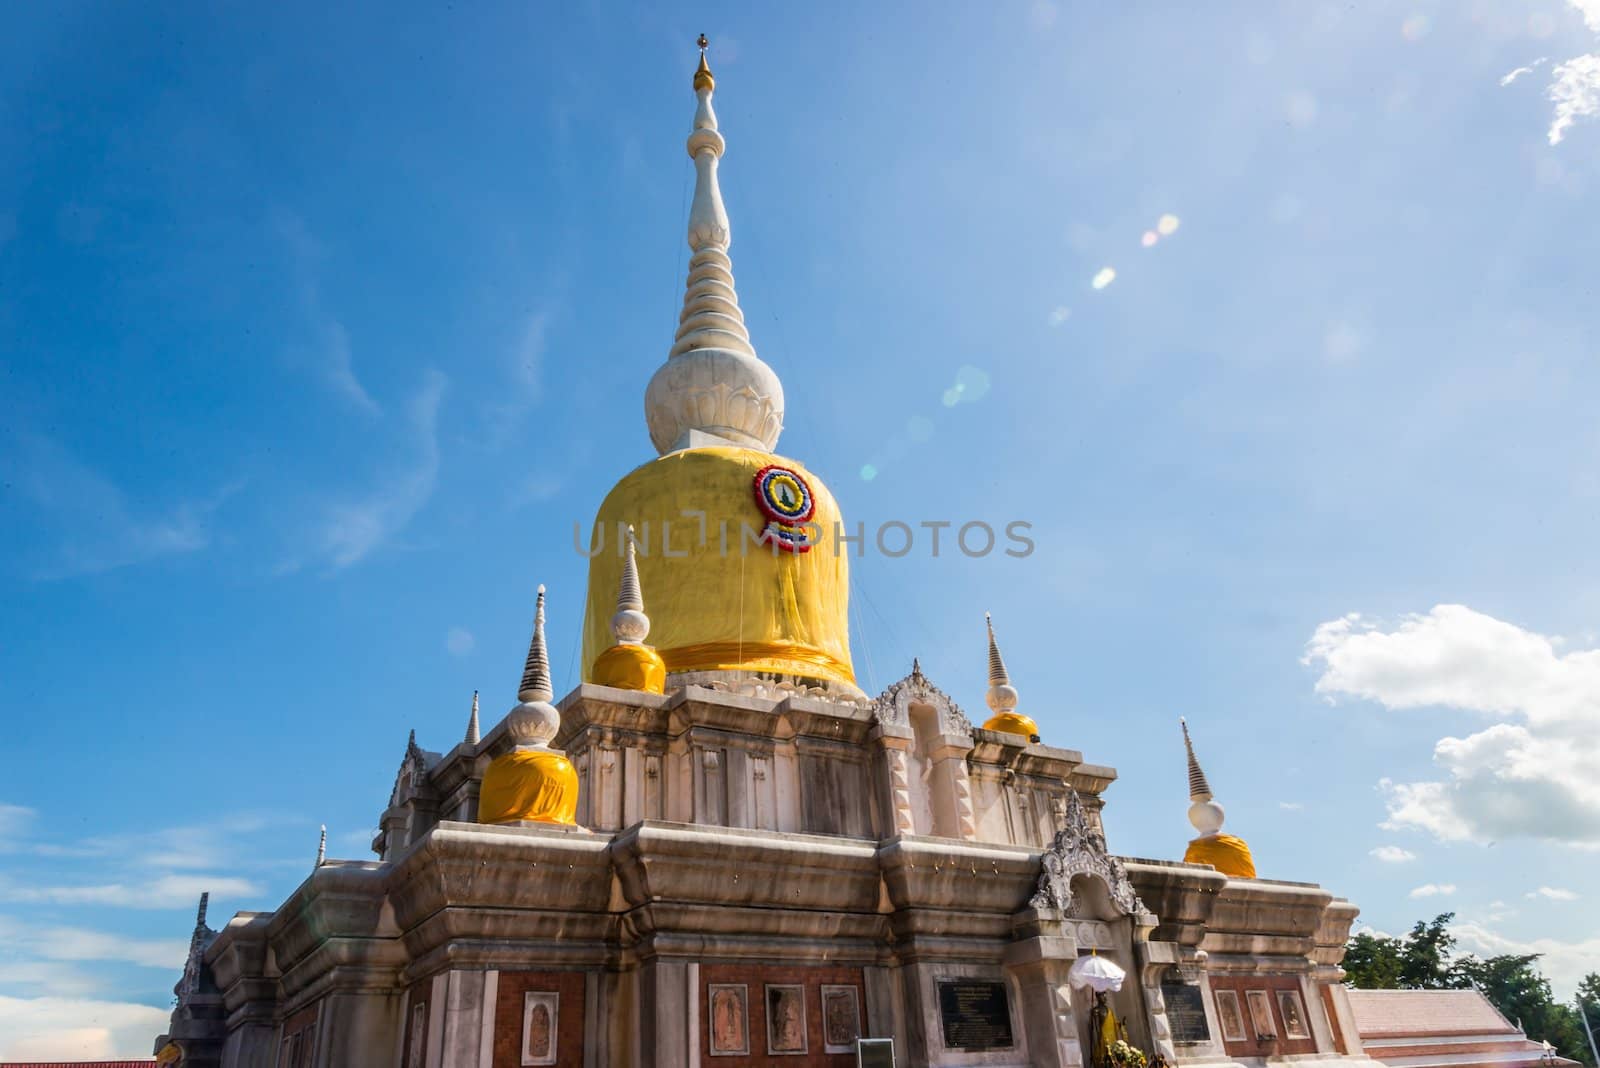 Buddha's relics in Thailand, Name is phra tard na dun